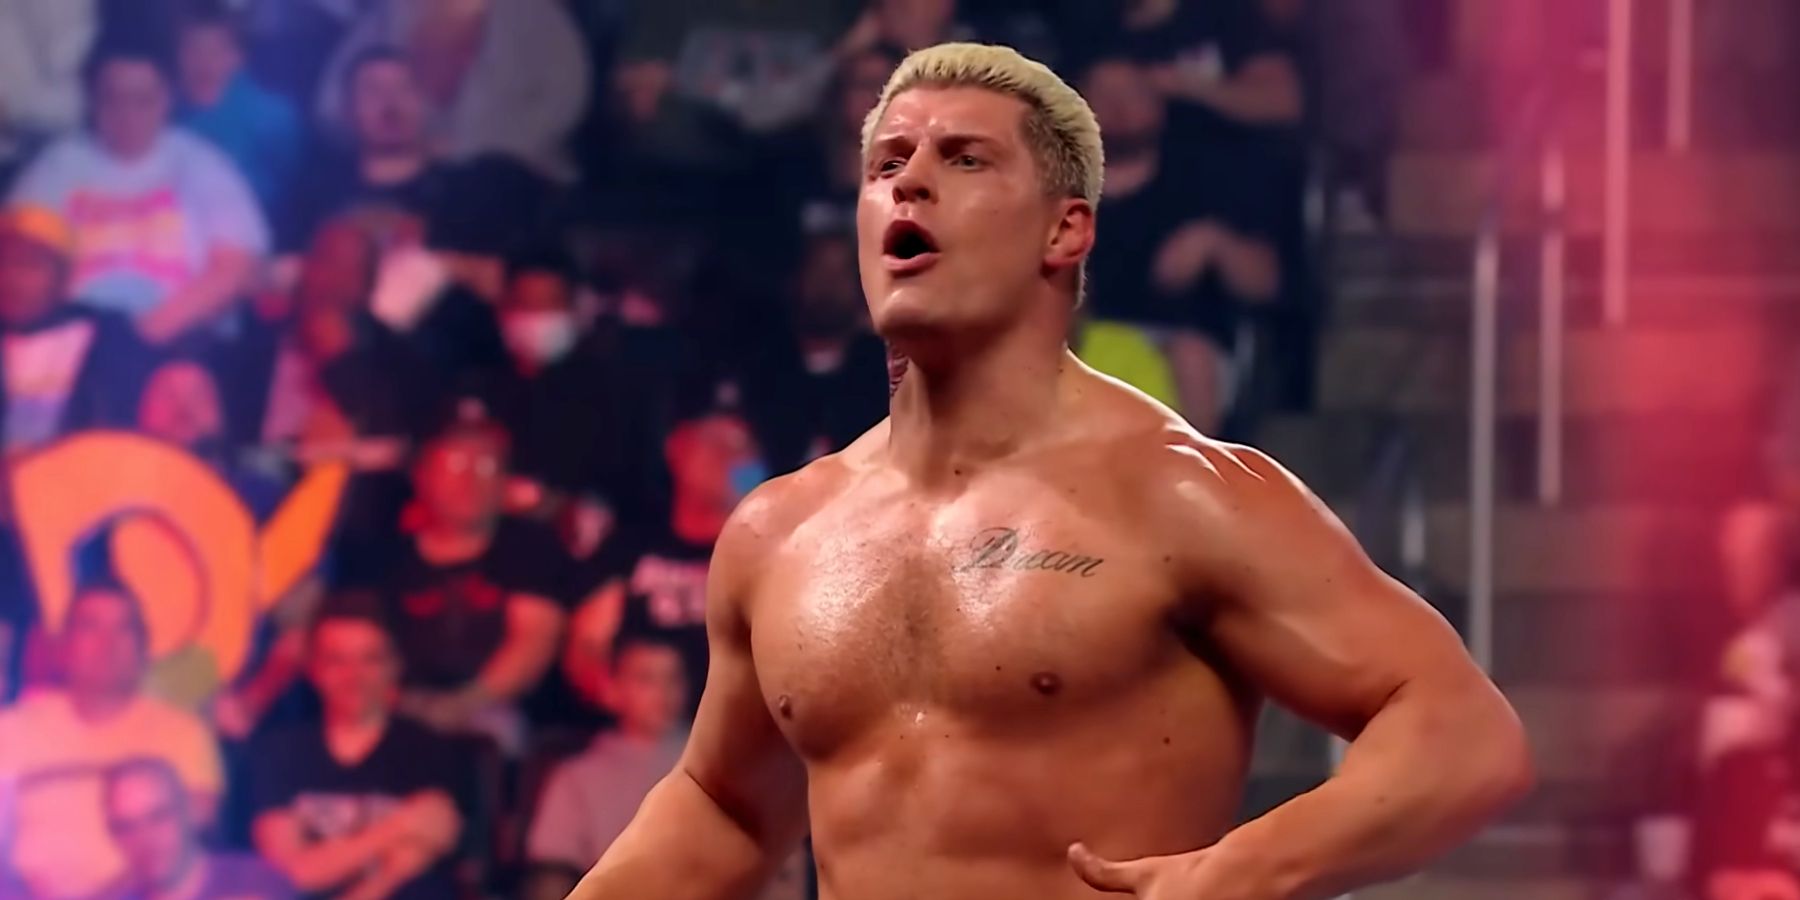 Cody Rhodes signals that he's gunning for the WWE Championship in 2022.